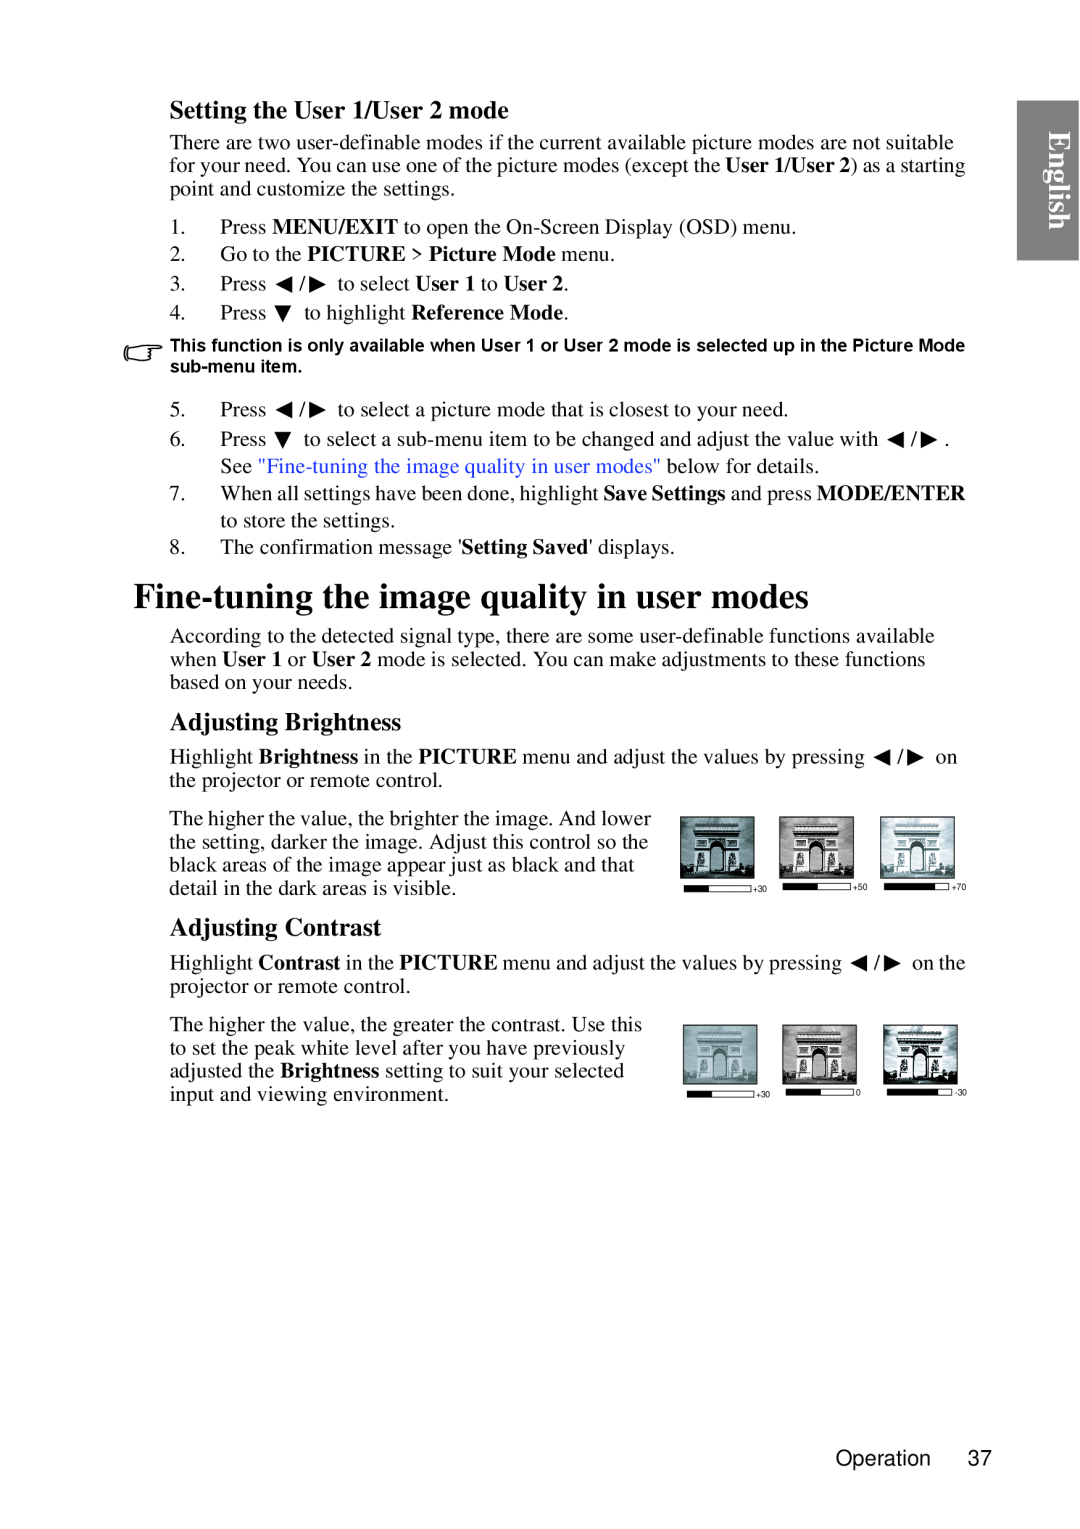 BenQ MP670 Fine-tuning the image quality in user modes, Setting the User 1/User 2 mode, Adjusting Brightness, English 